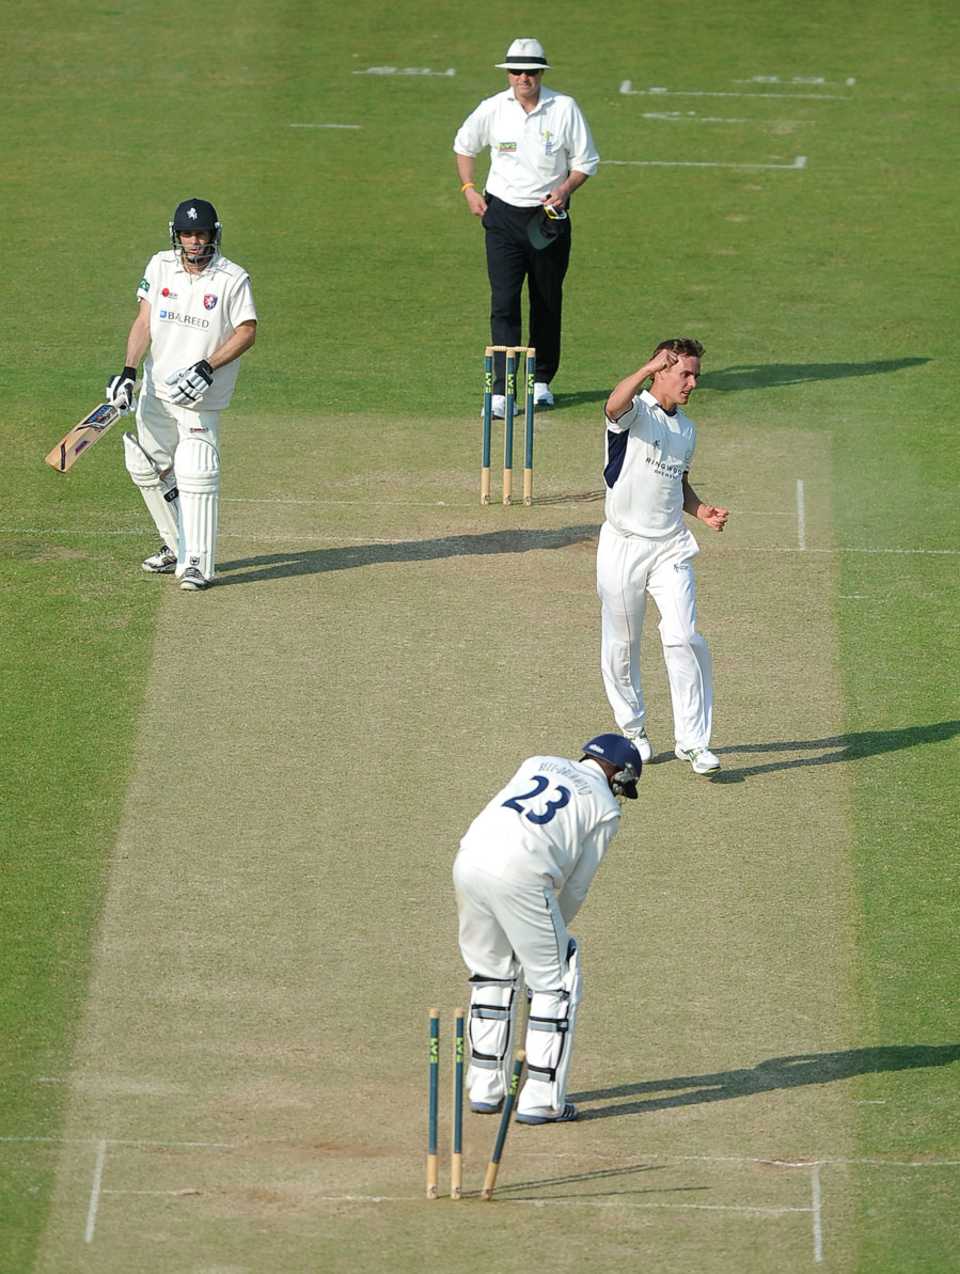 David Griffiths pegged back Daniel Bell-Drummond's off stump